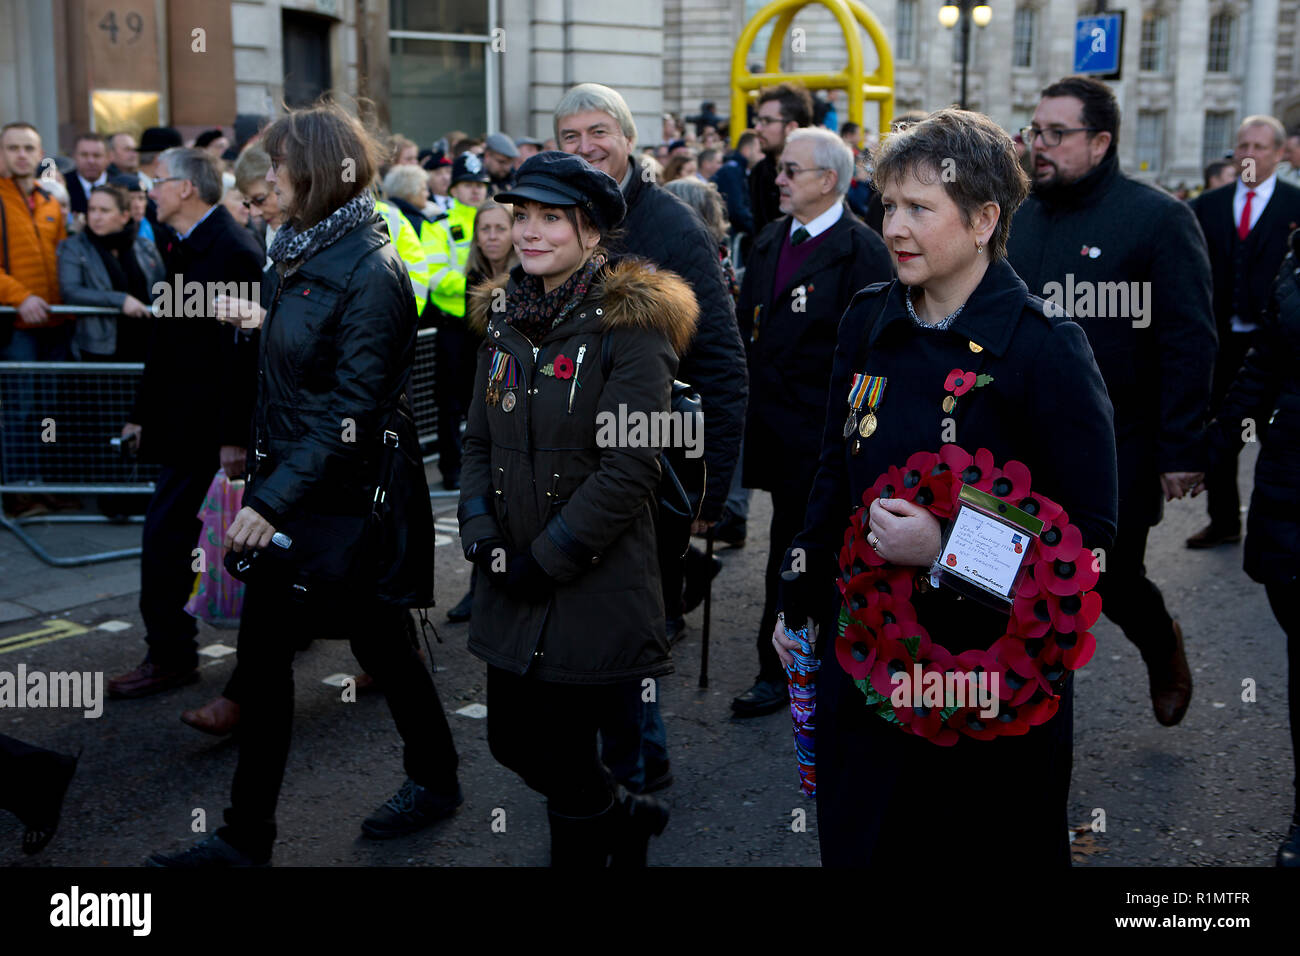 London, England, UK - 11th Nov 2018. Participants in the Remembrance Day Celebrations walking from Admiralty Arch into Horse Guards Parade to honour the Centennial of Armistice Day 1918. (Photo © Michael Cole) Stock Photo